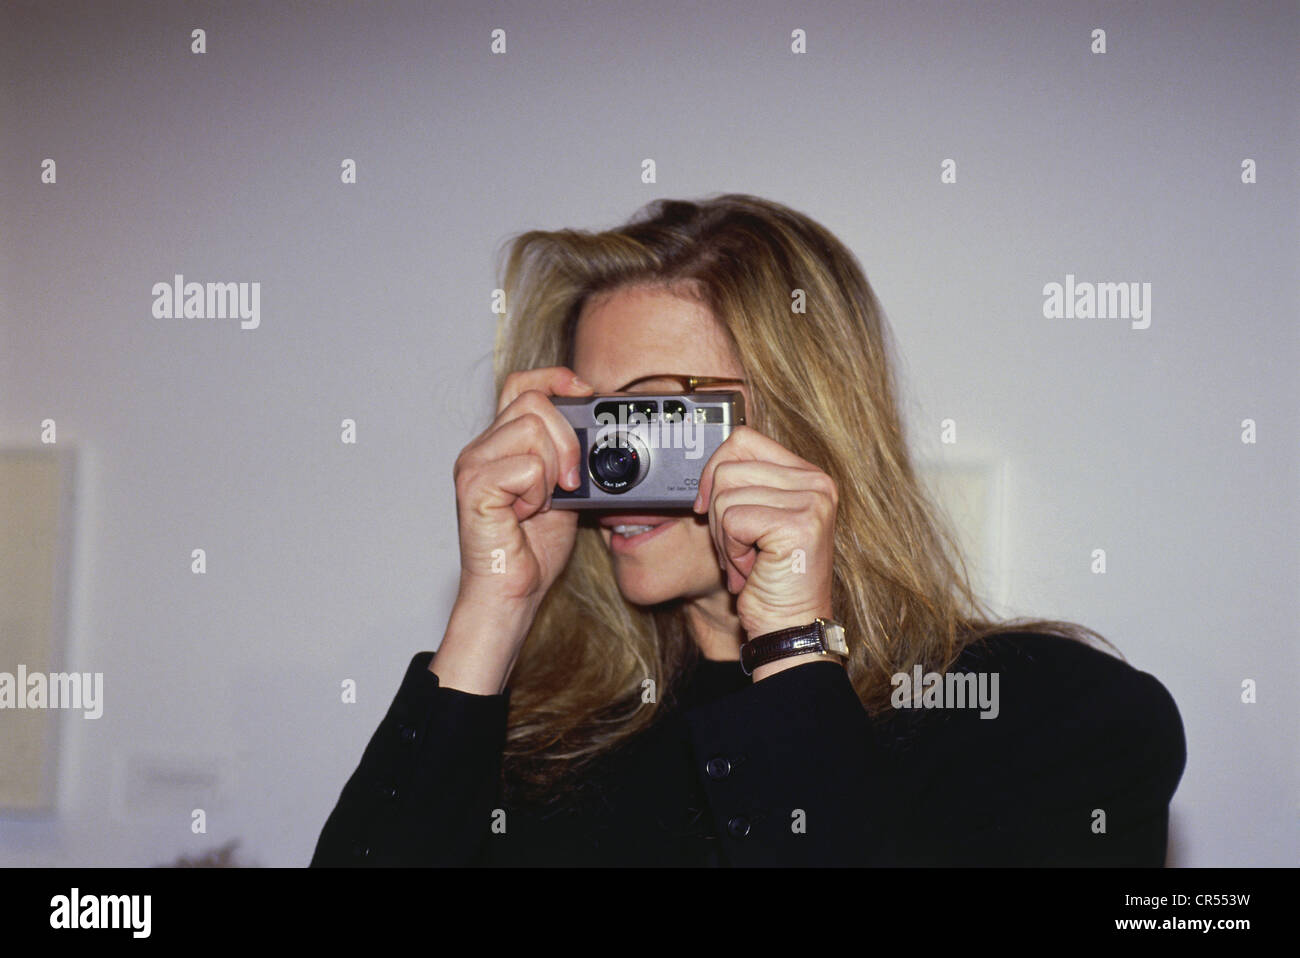 Leibovitz, Annie, * 2.10.1949, American photographer, half length, press call to the exhibition opening at Munich City Museum, 1992, Stock Photo